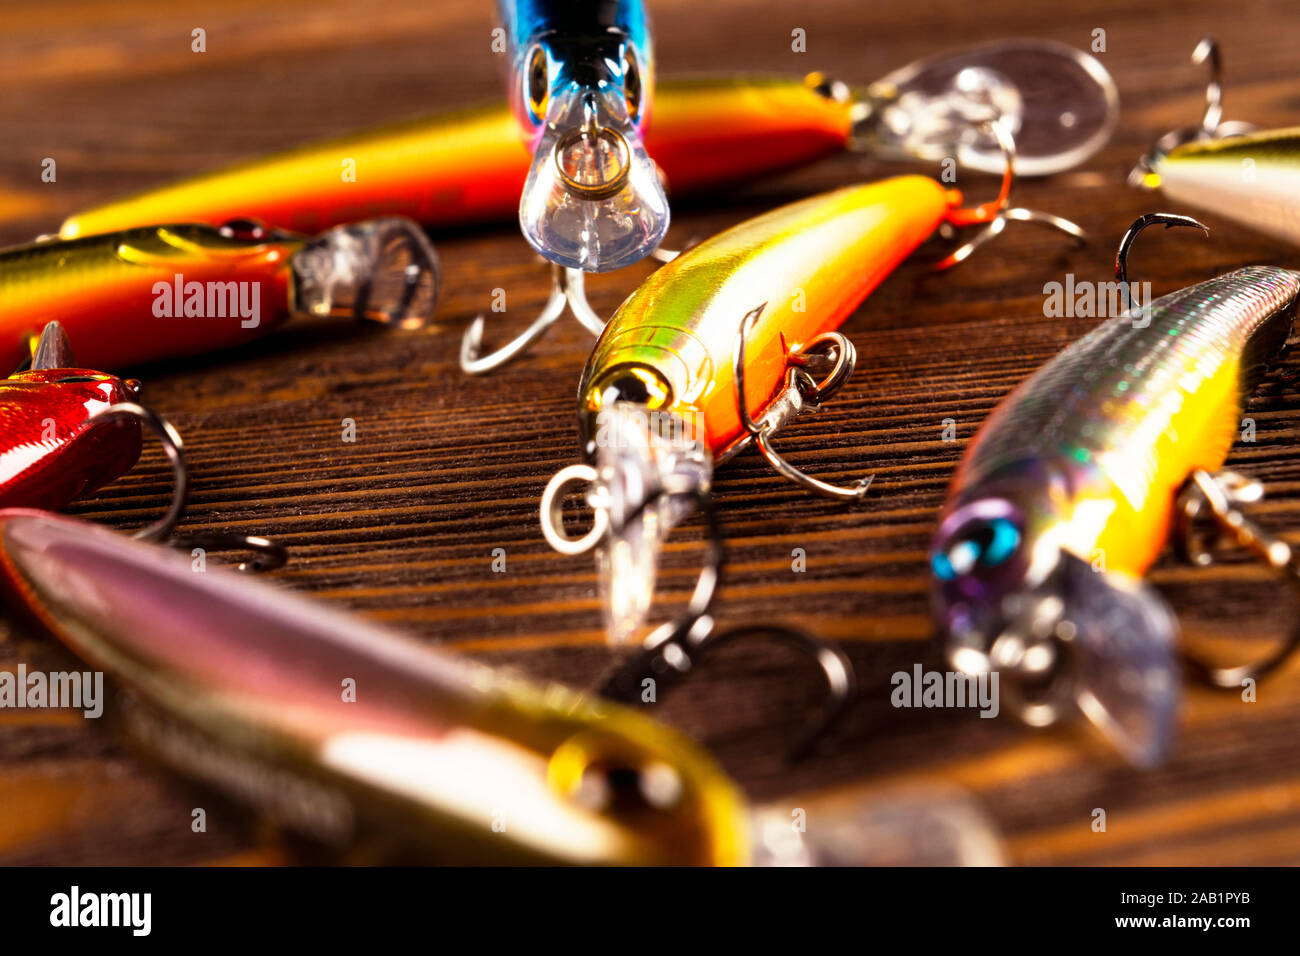 Fishing tackle background. Fishing tackles and wobbler on wooden